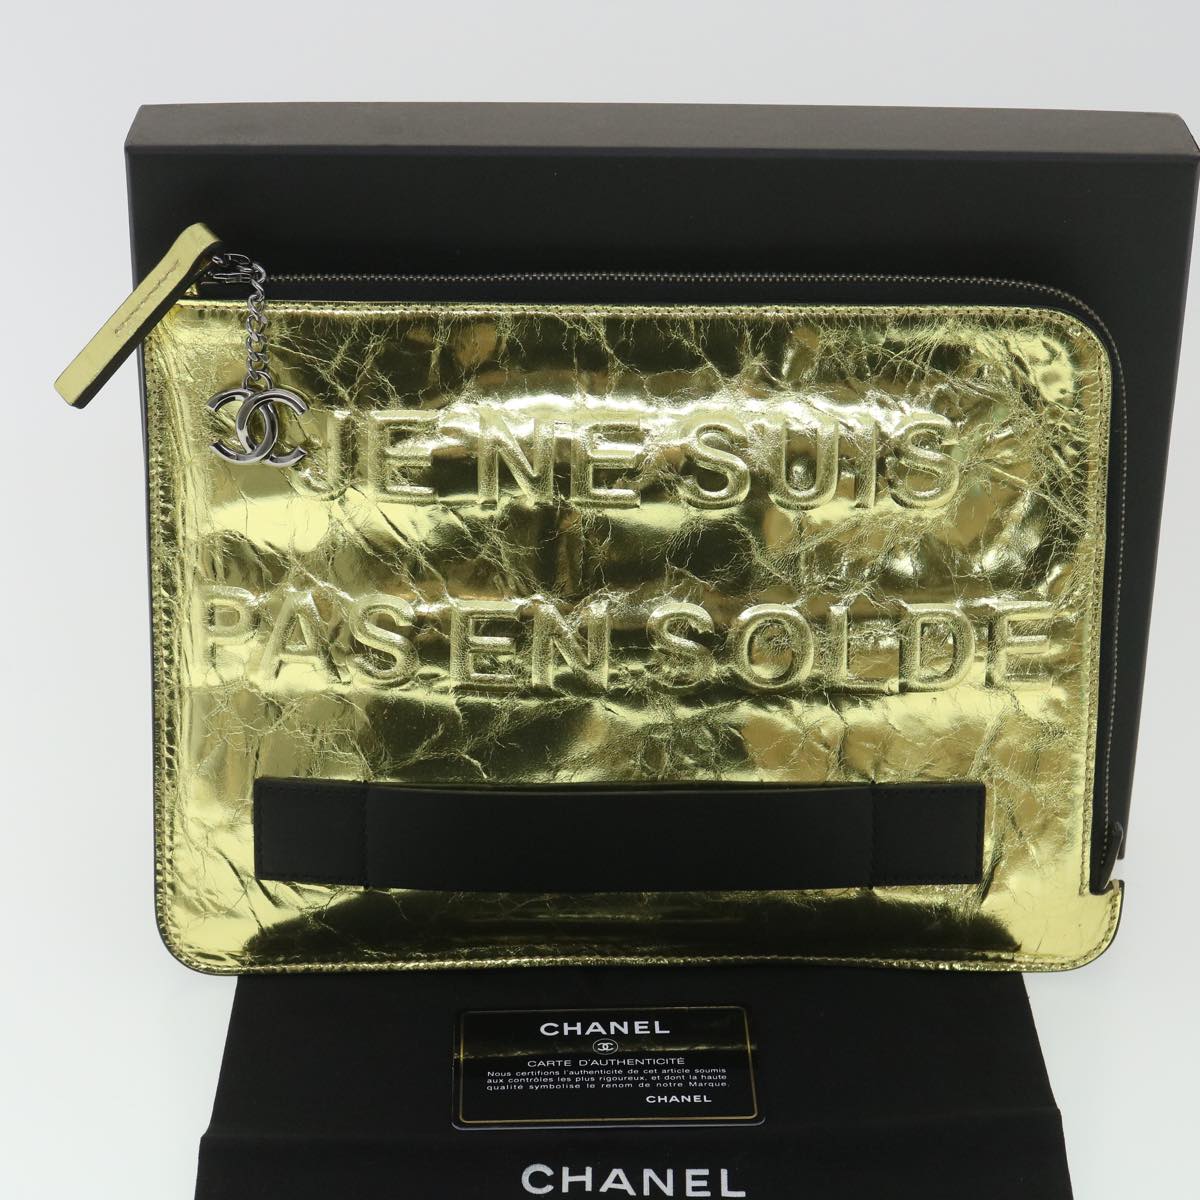 CHANEL Clutch Bag Metallic Leather Gold A82164 CC Auth 38172